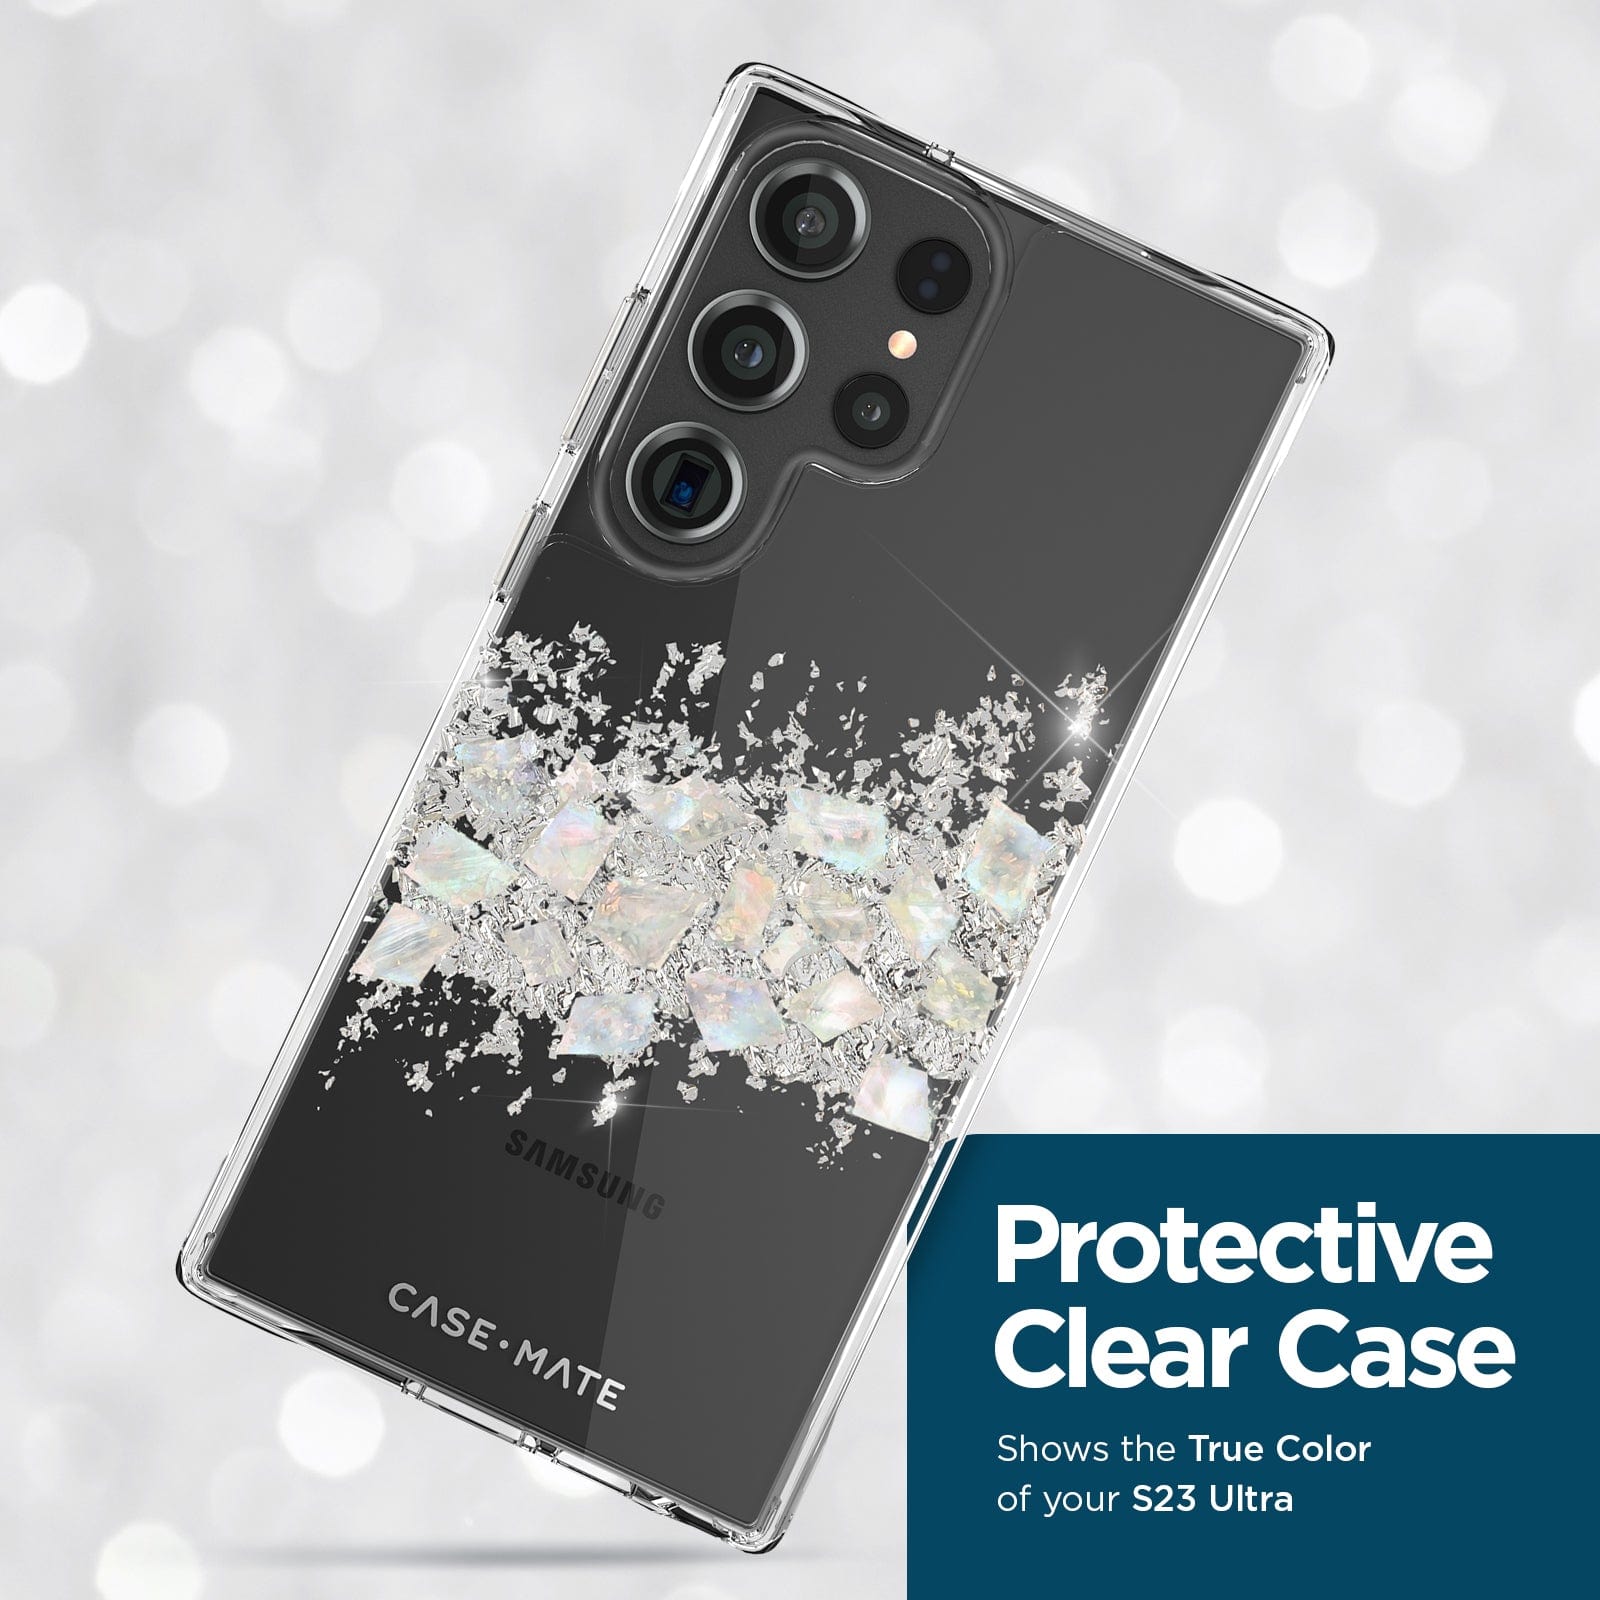 PROTECTIVE CLEAR CASE. SHOWS THE TRUE COLOR OF YOUR S23 ULTRA